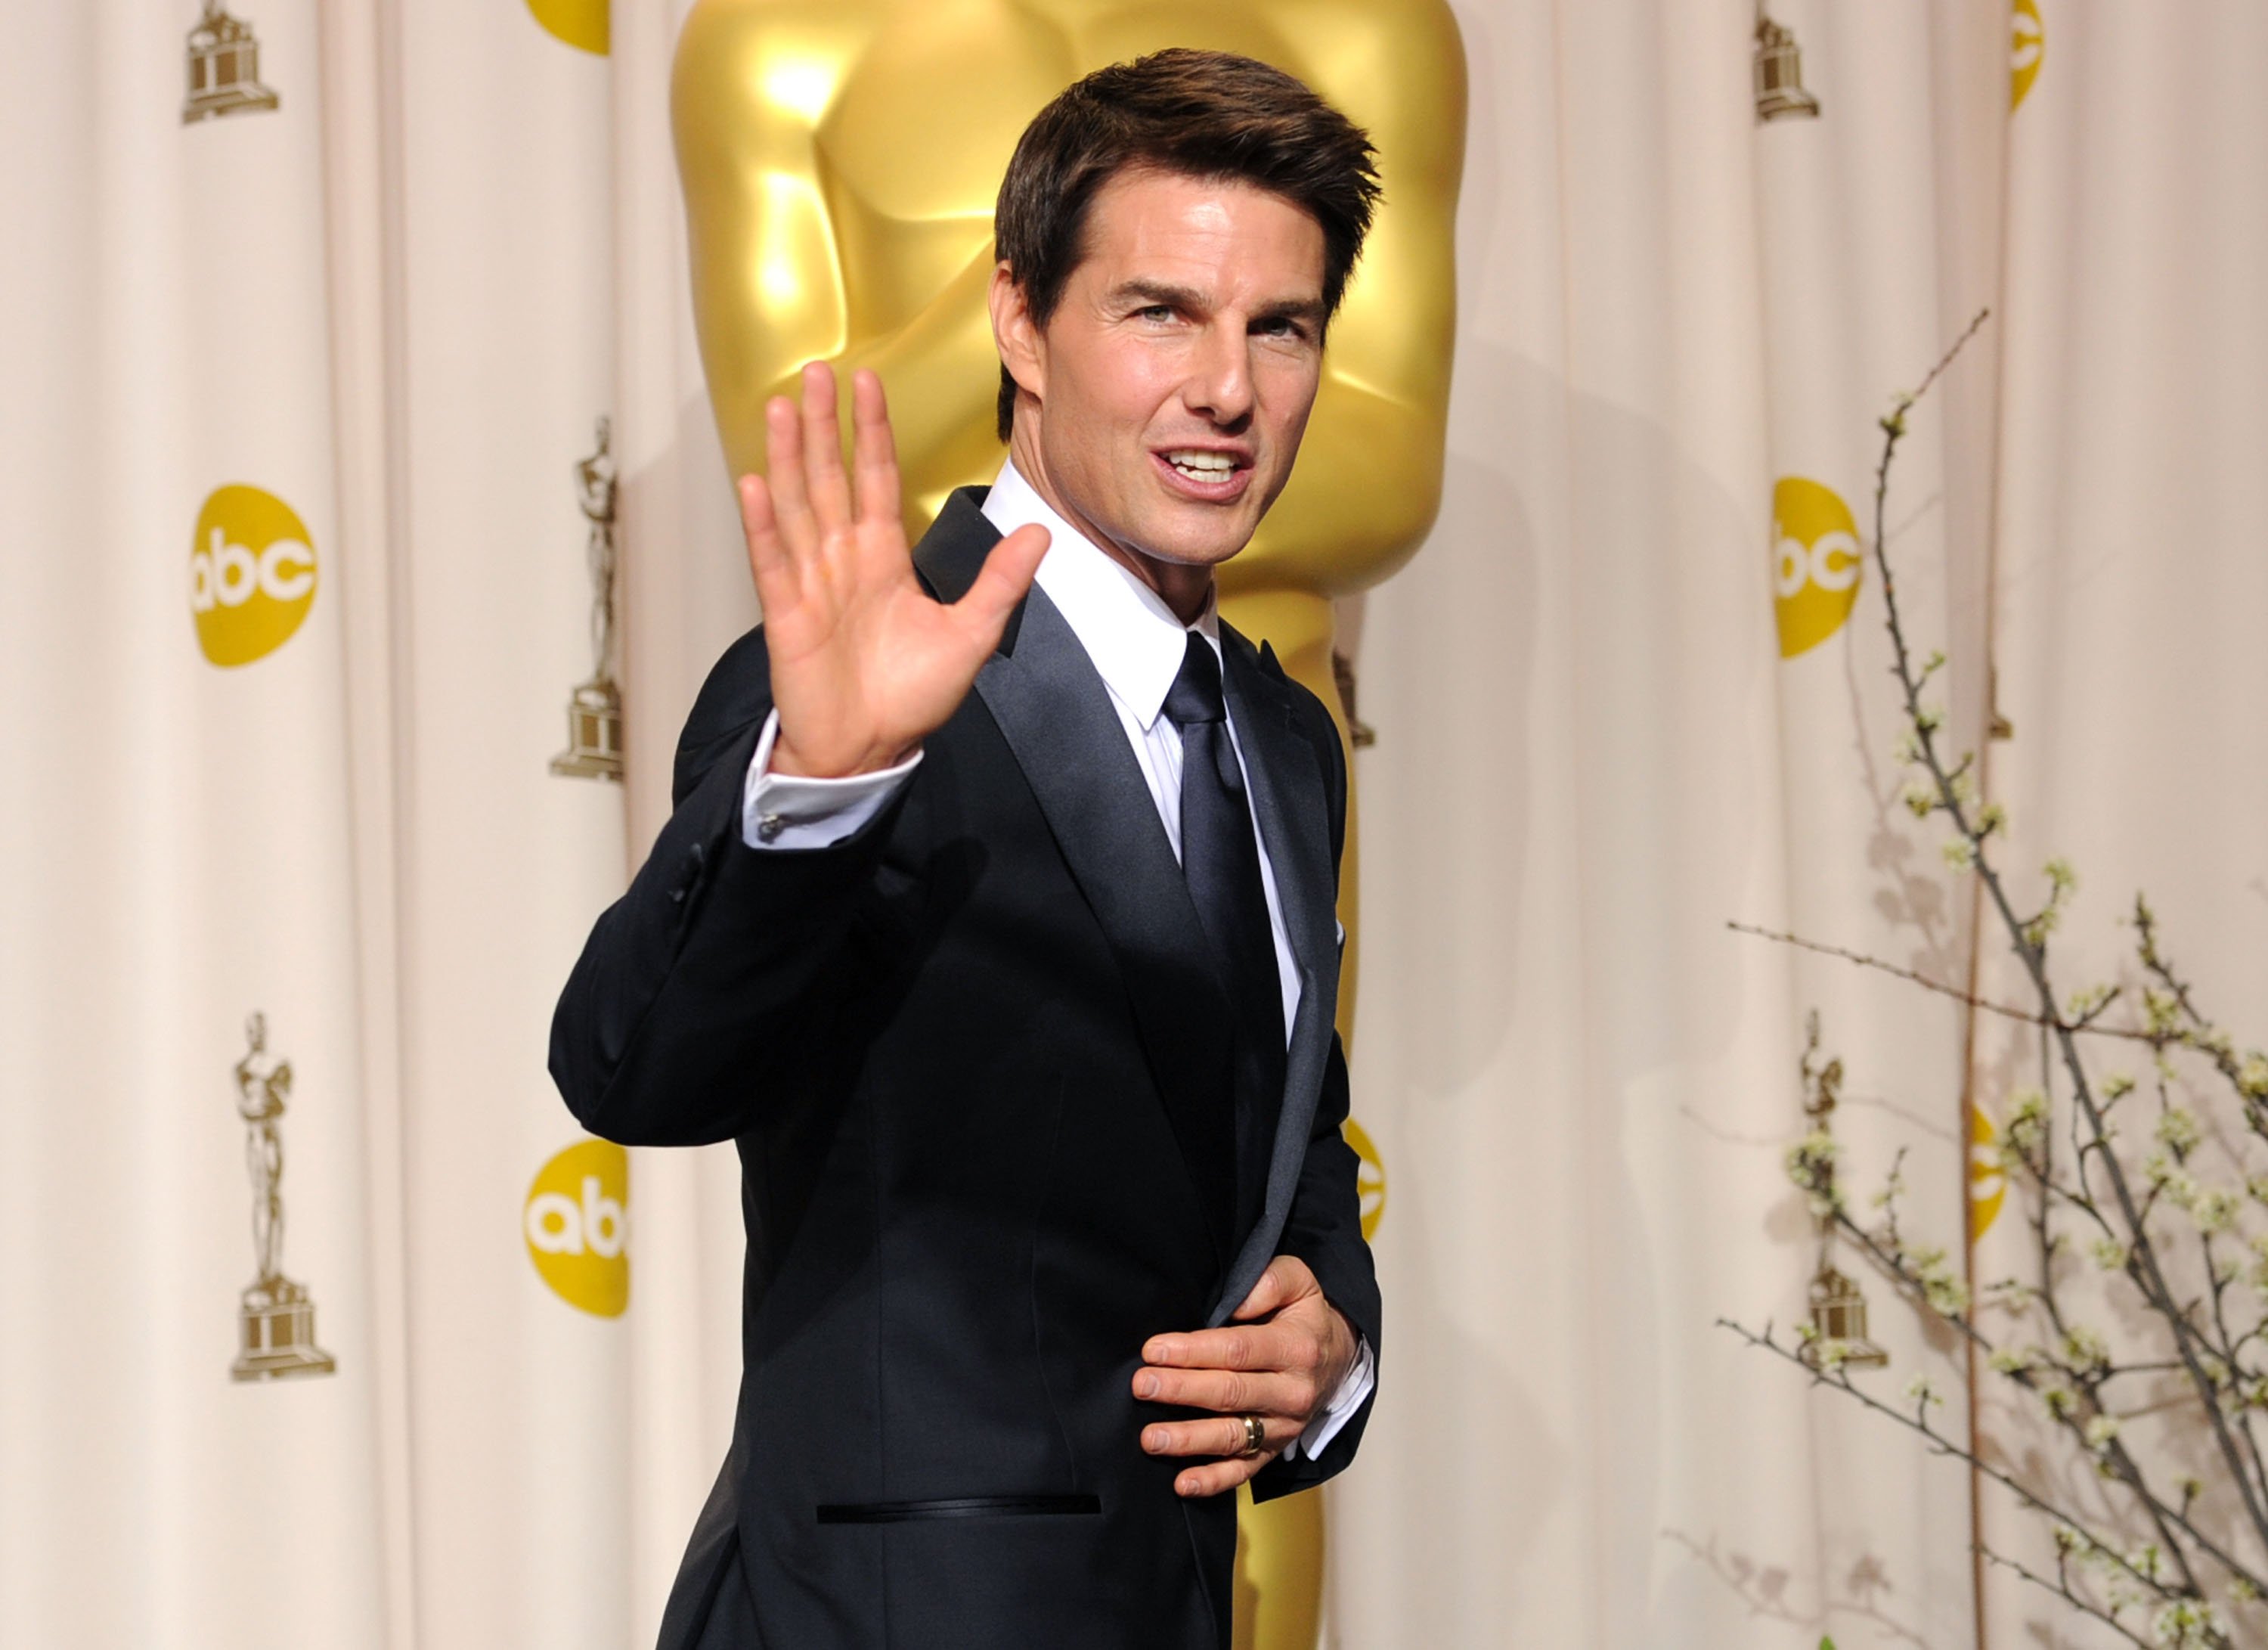 Tom Cruise attends the 2012 Academy Awards in Hollywood, California. | Photo: Getty Images